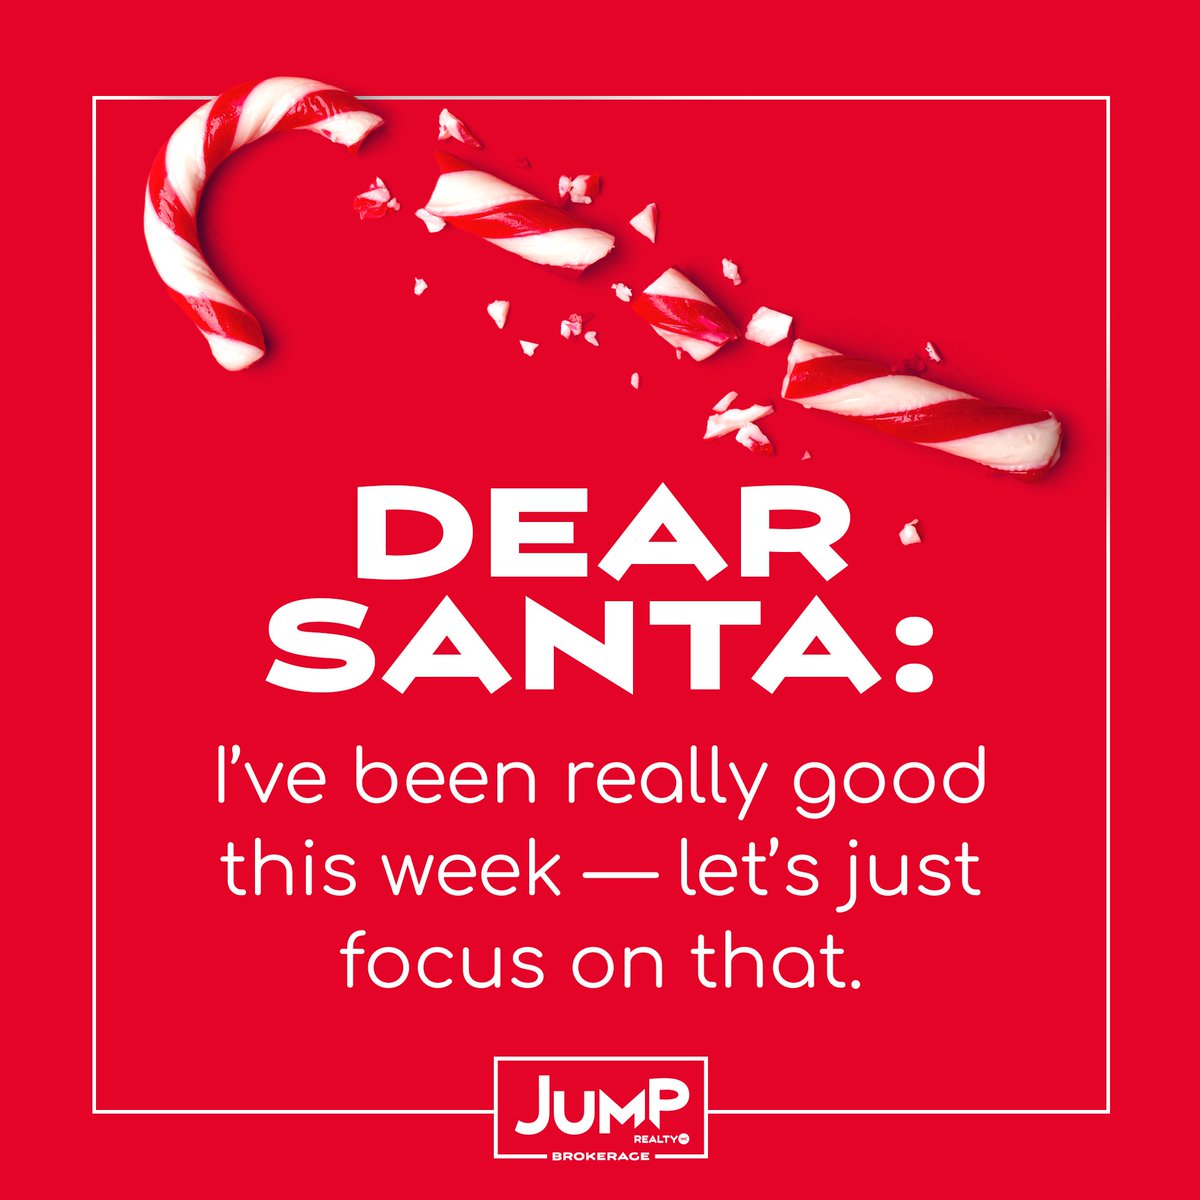 Jump Fact: When you stop believing in Santa, you get socks and underwear.

Santa arrives this Sunday, November 12 at Devonshire Mall! Catch a full holiday lineup at windsorite.ca/events.

#JumpRealty #devonshiremall #YQG #devonshirestyle #dmallsanta #santasarrival #Santa